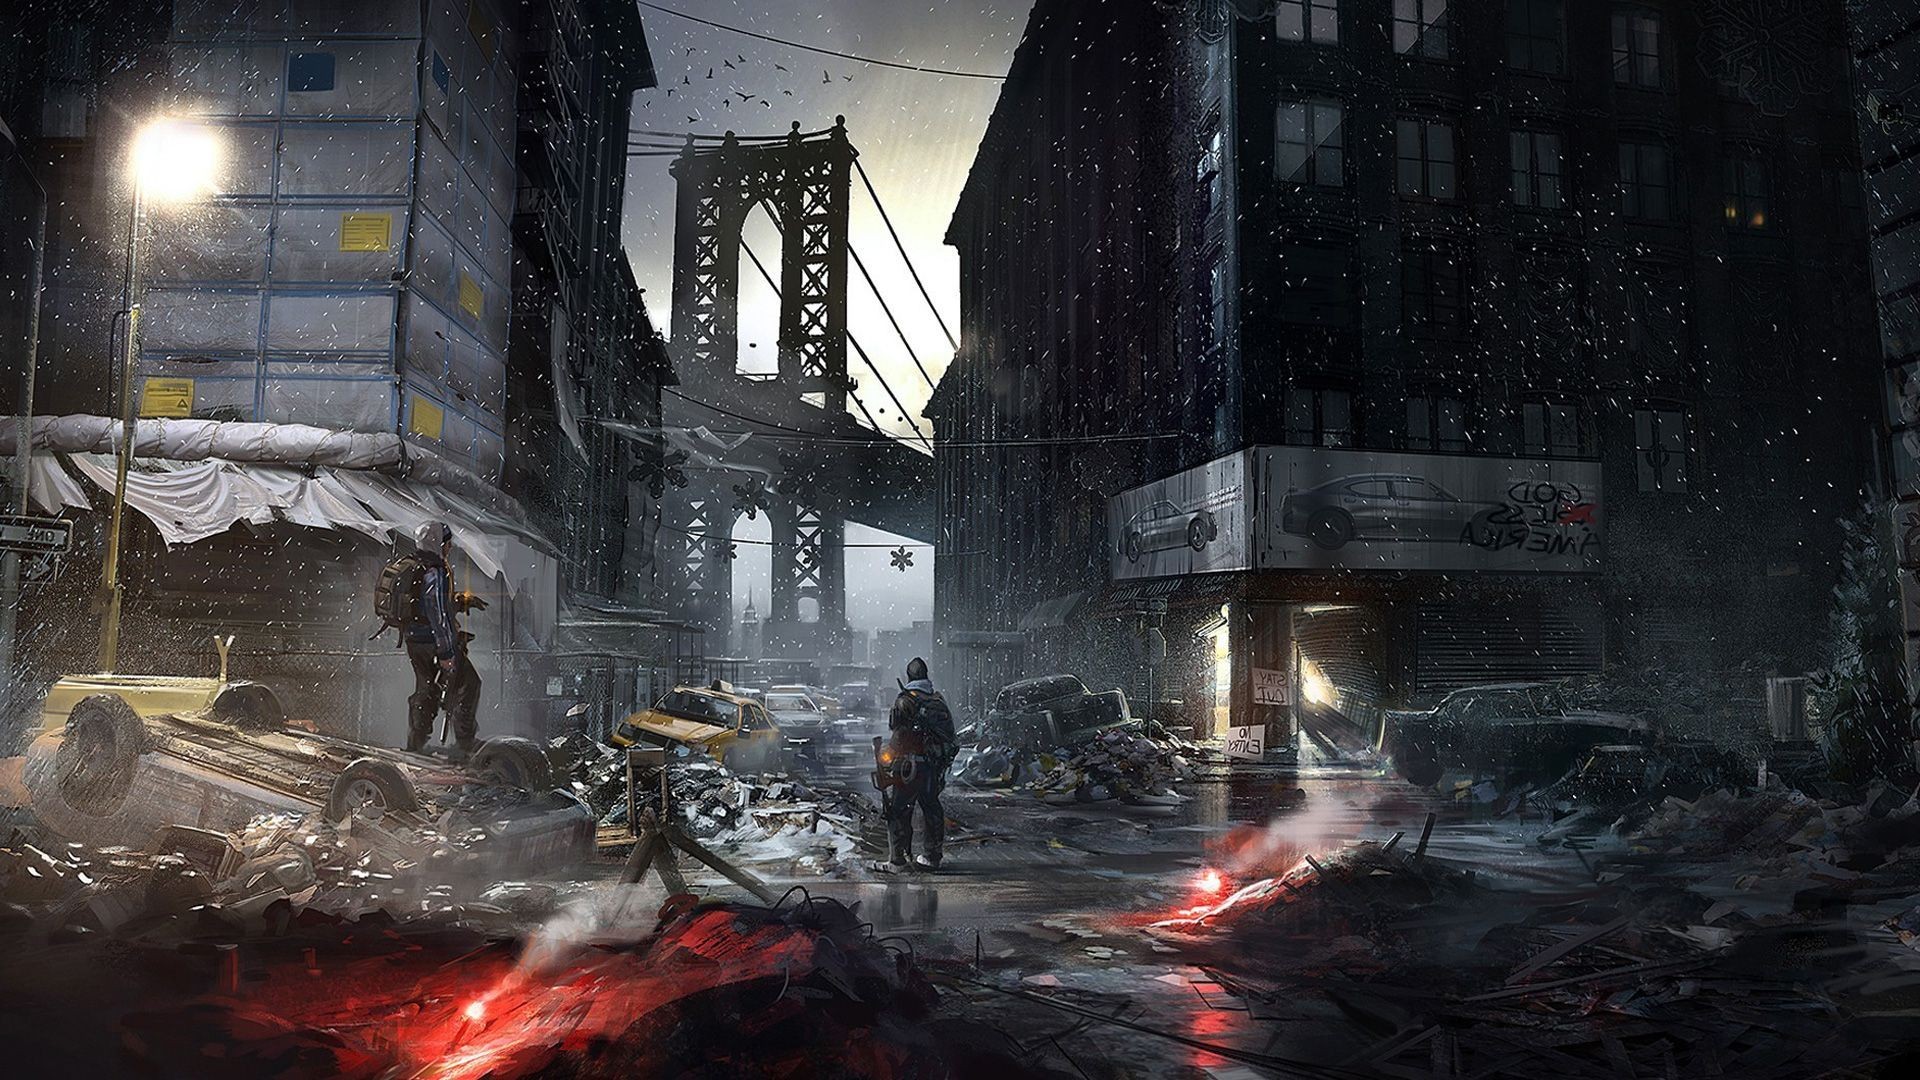 Tom Clancys The Division Apocalyptic Tom Clancys Video Games Concept Art Manhattan Computer Game Bro 1920x1080